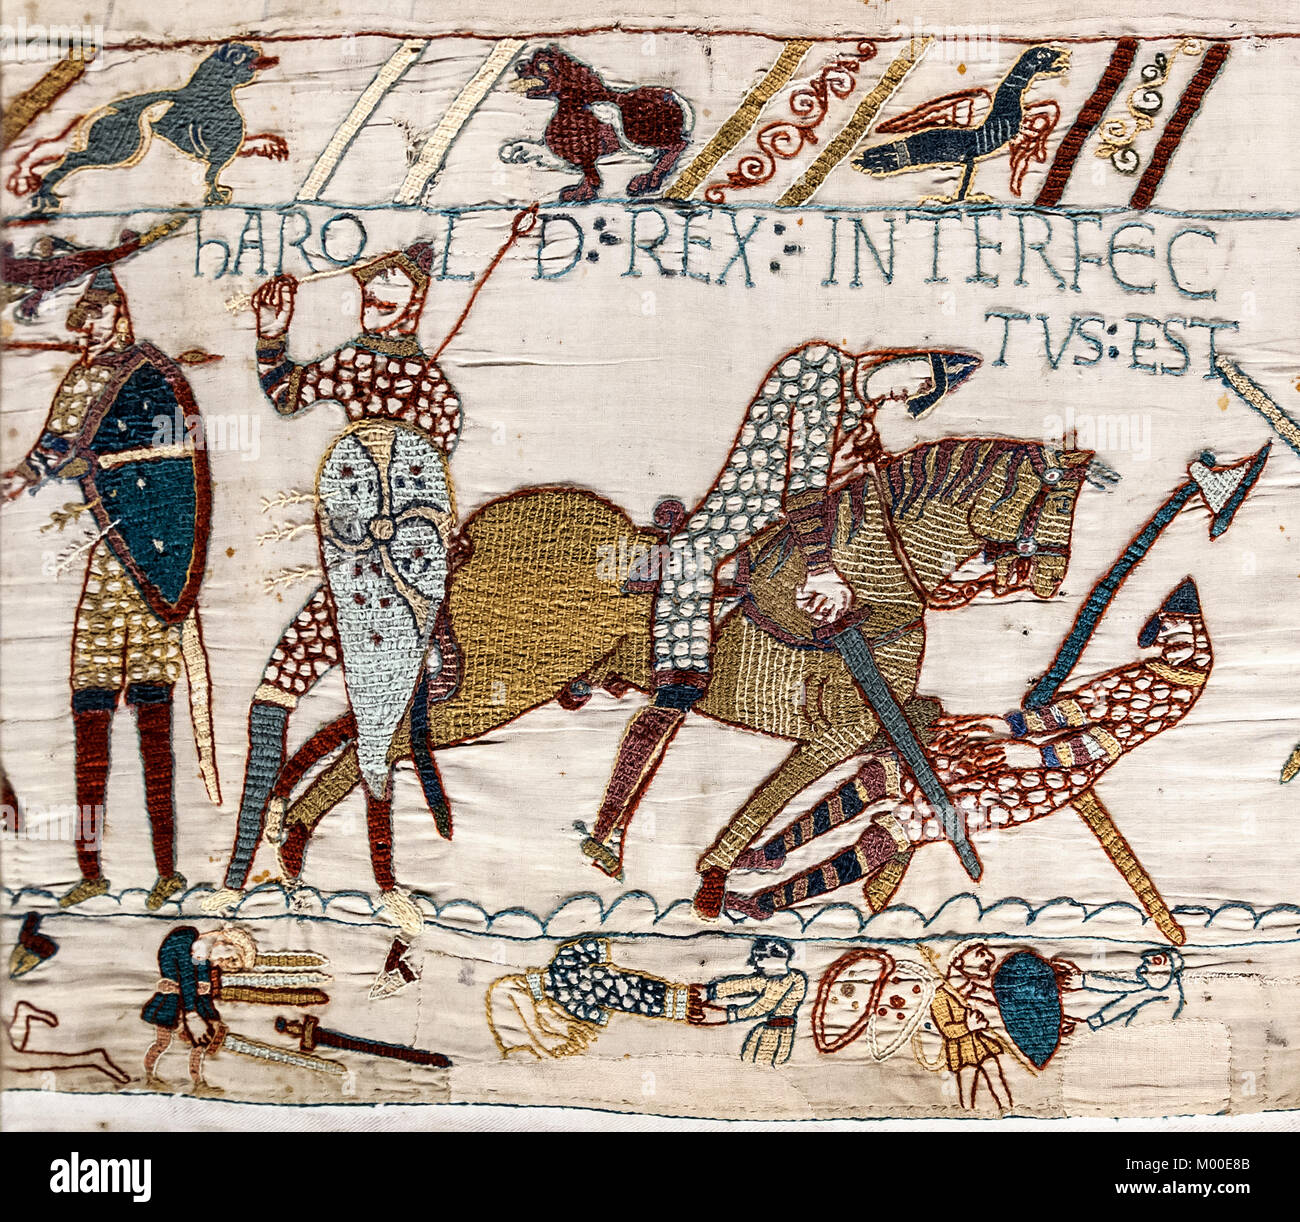 Bayeux Tapestry, A segment of the Bayeux Tapestry, Harold's death. Legend above: Harold rex interfectus est, "King Harold is killed" Stock Photo